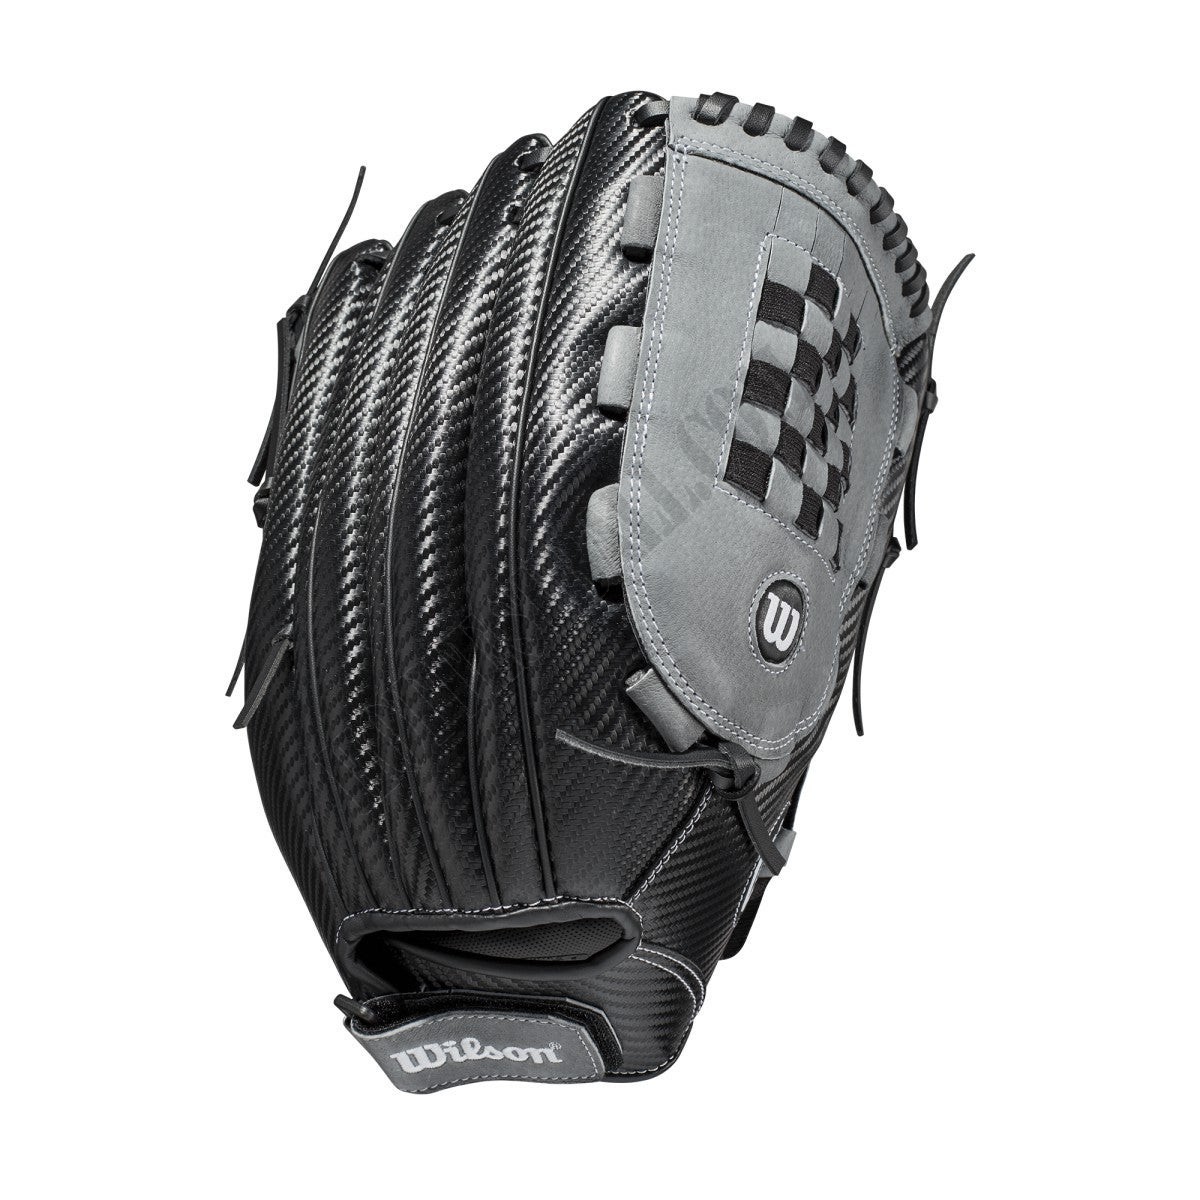 2021 A360 SP14 14" Slowpitch Softball Glove ● Wilson Promotions - -1